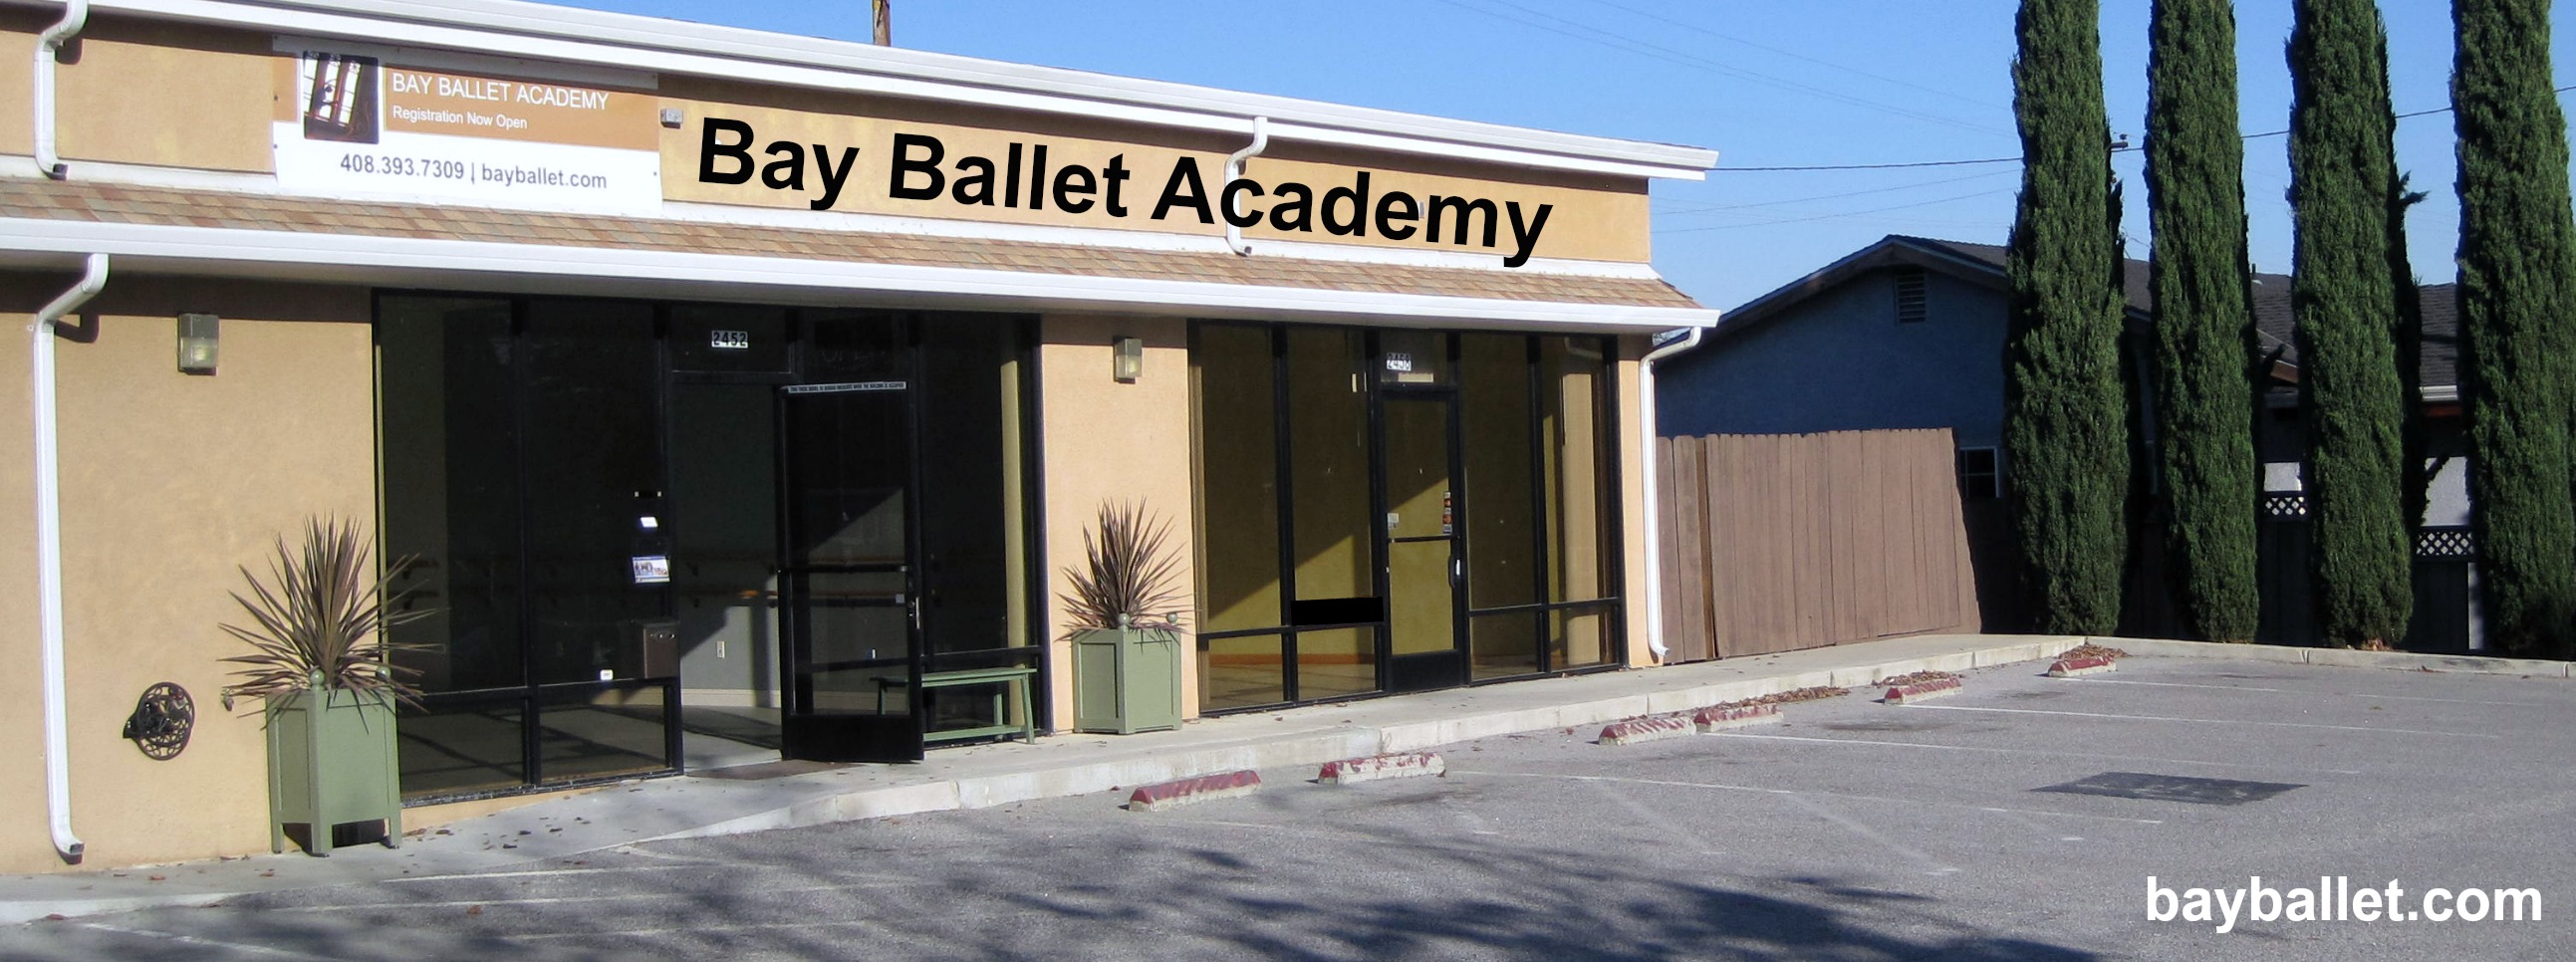 Bay Ballet Academy Students. Maximo Califano, Director & Main Dance Teacher. We offer professional dance instruction to students of all ages, size, and skill levels. We are located in Willow Glen, San Jose, CA. For more info, please visit www.bayballet.com